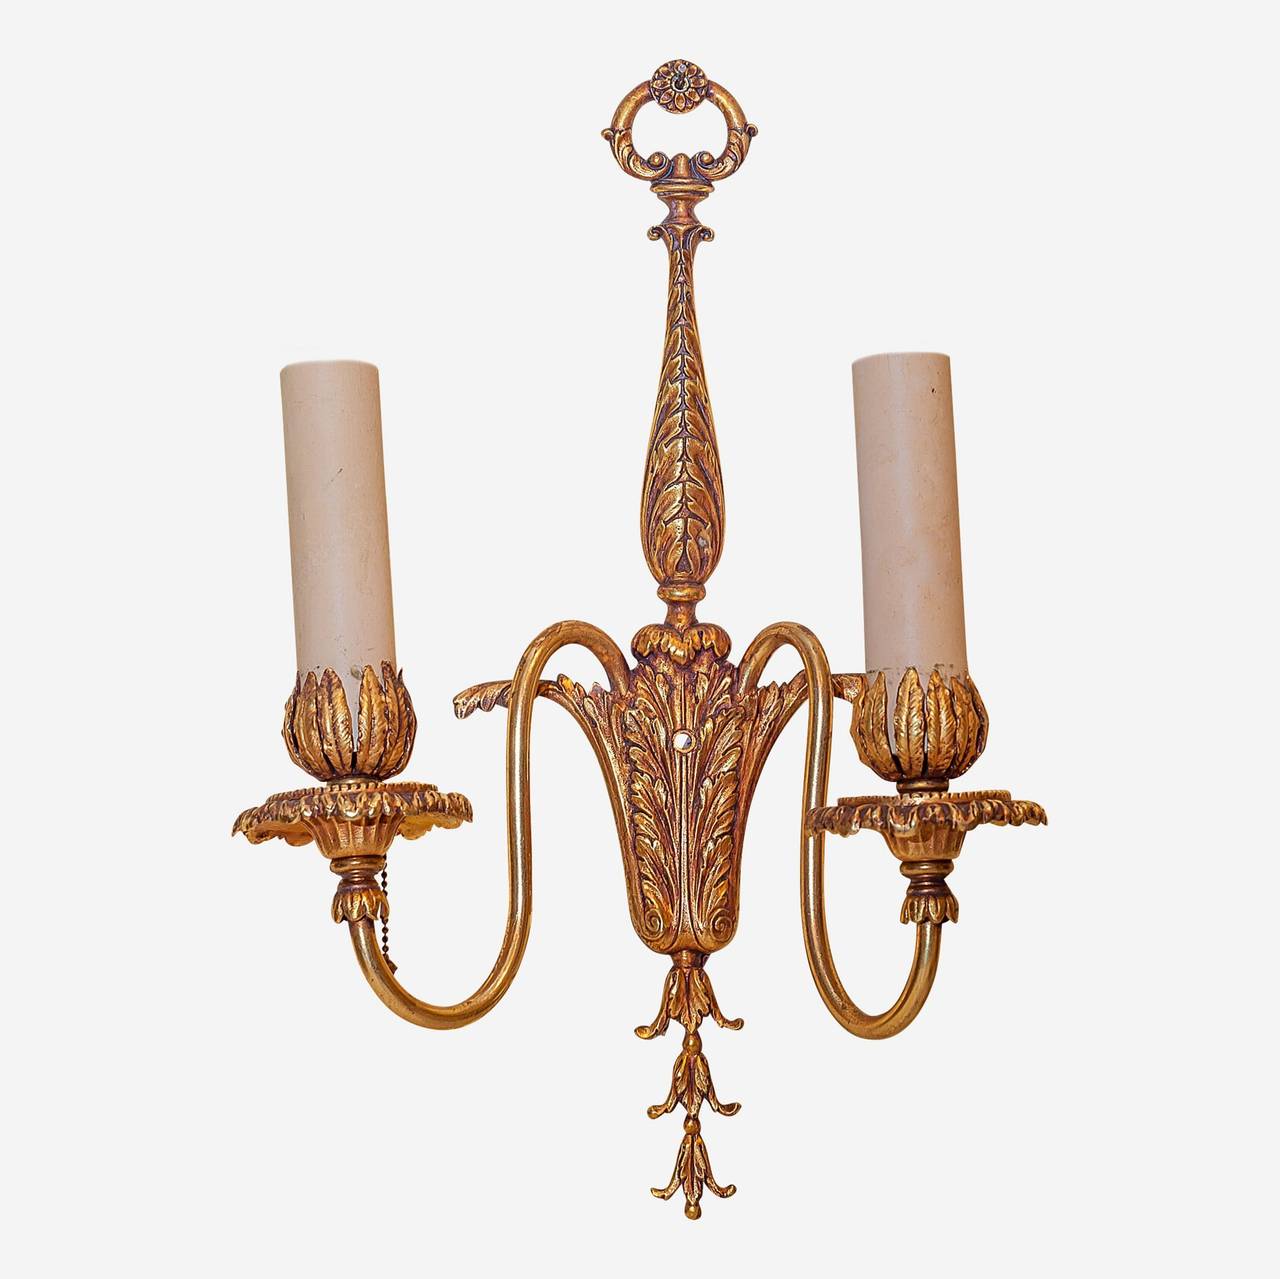 Set of four gilt bronze two-arm wall light sconces
Stock number: L220.